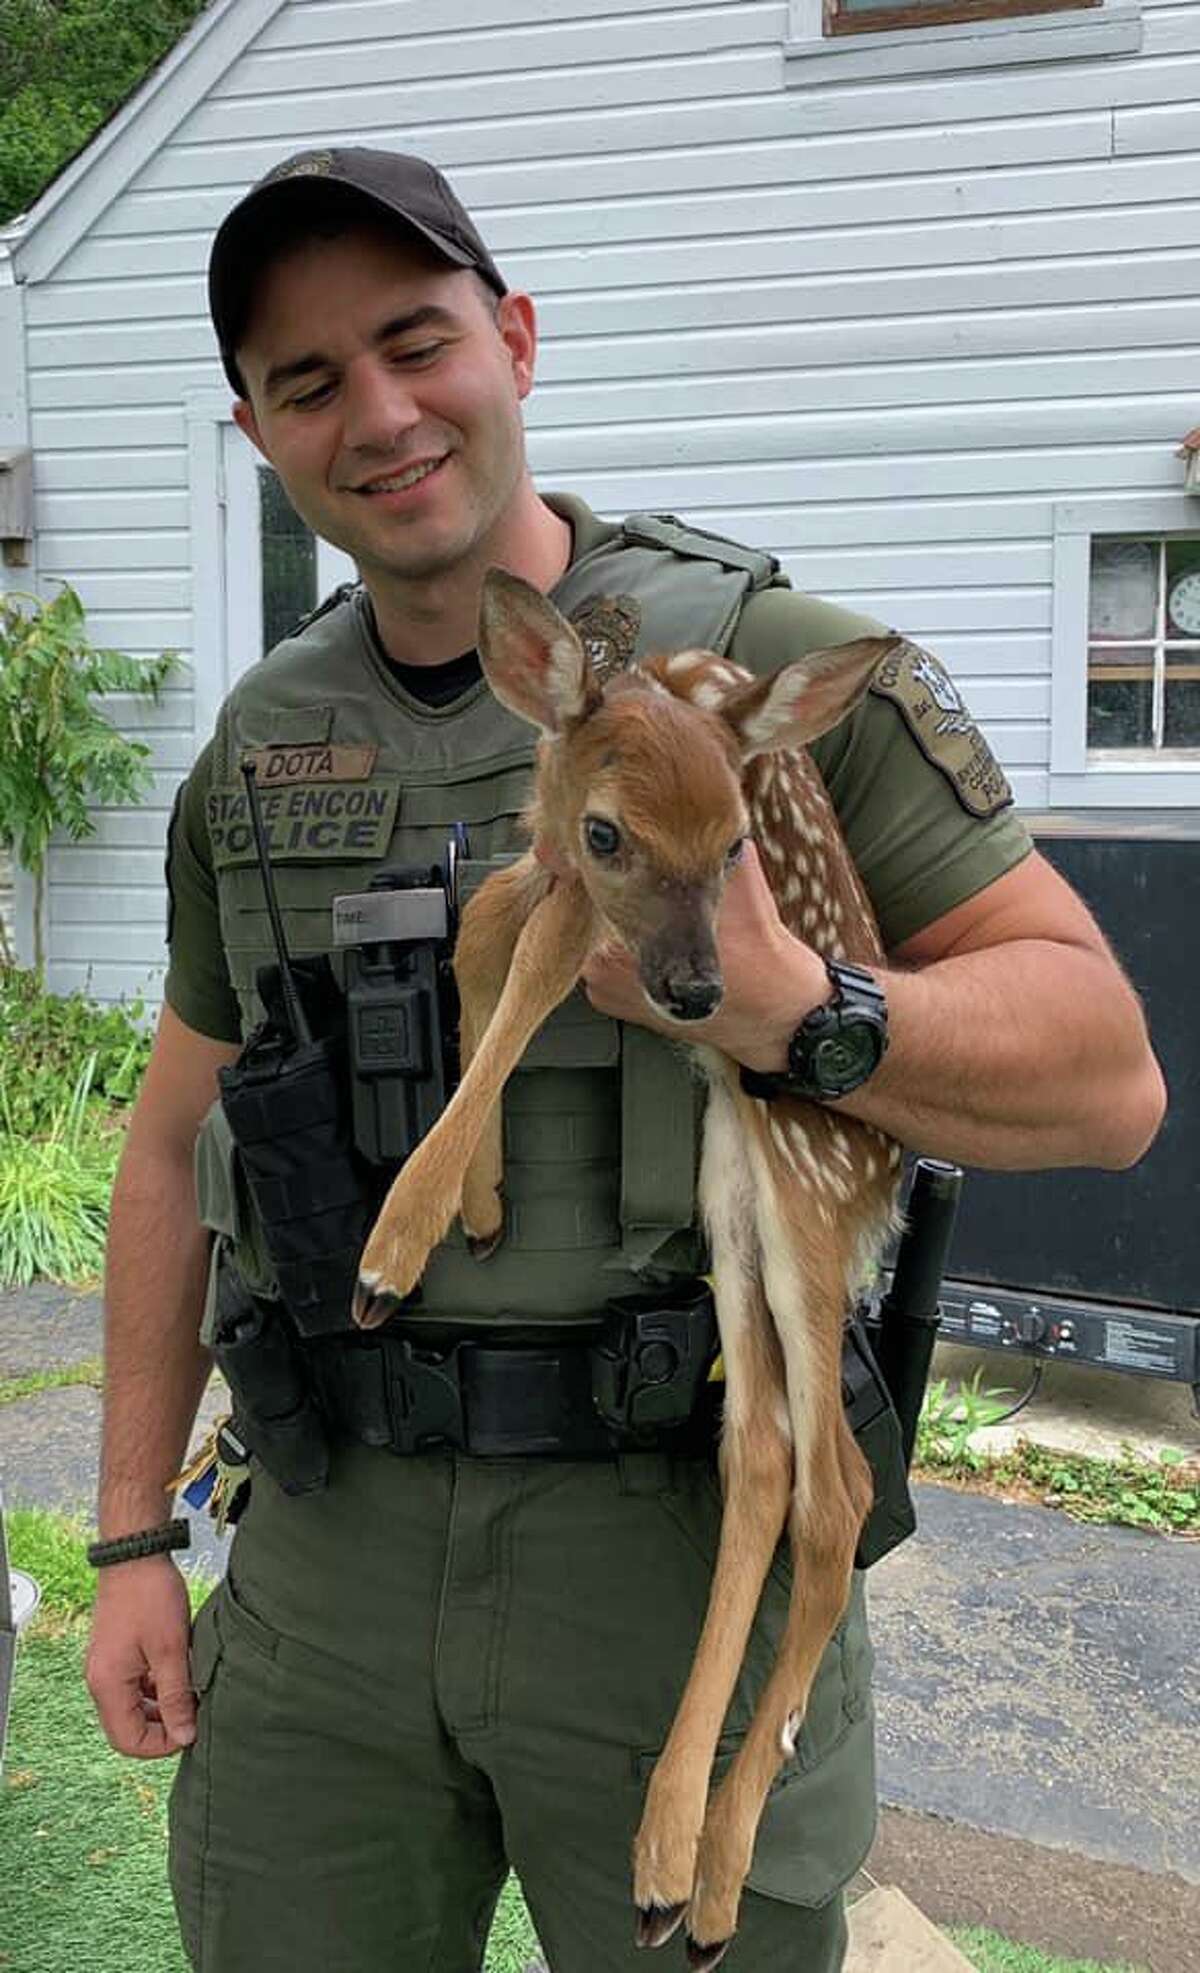 Connecticut State Environmental Conservation Police Officer Dota with a rescued deer fawn.